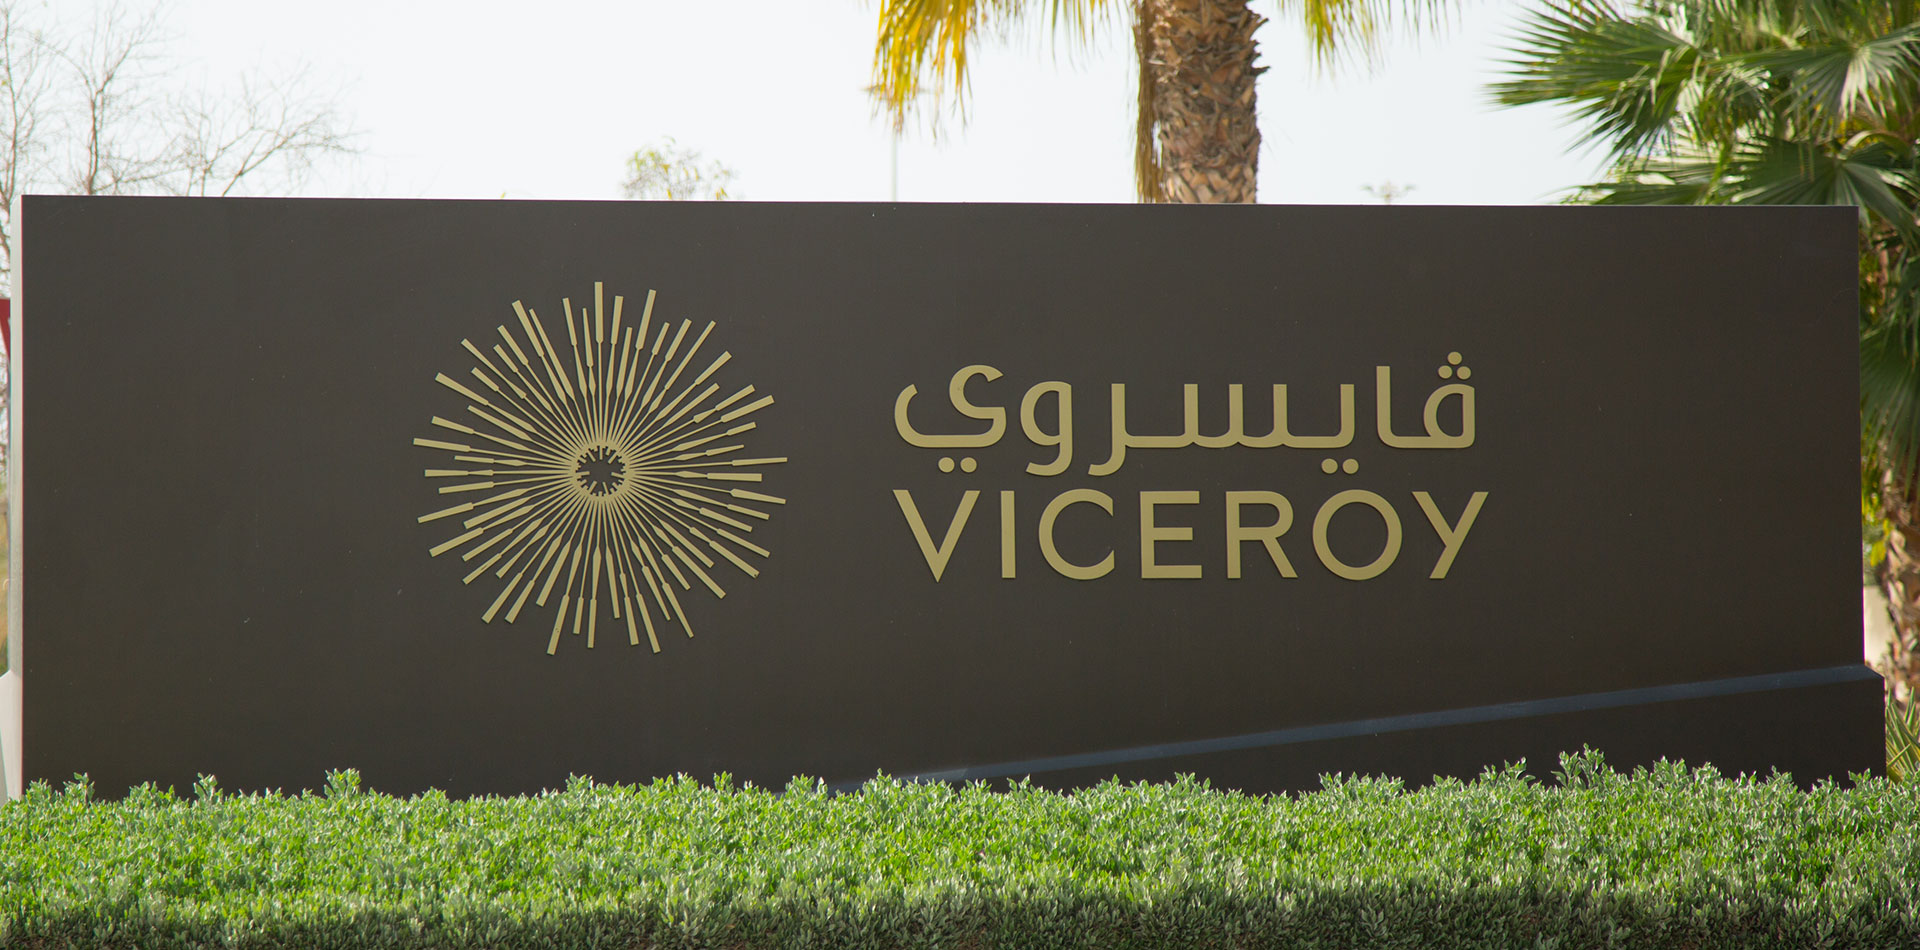 Monument Signage of Viceroy